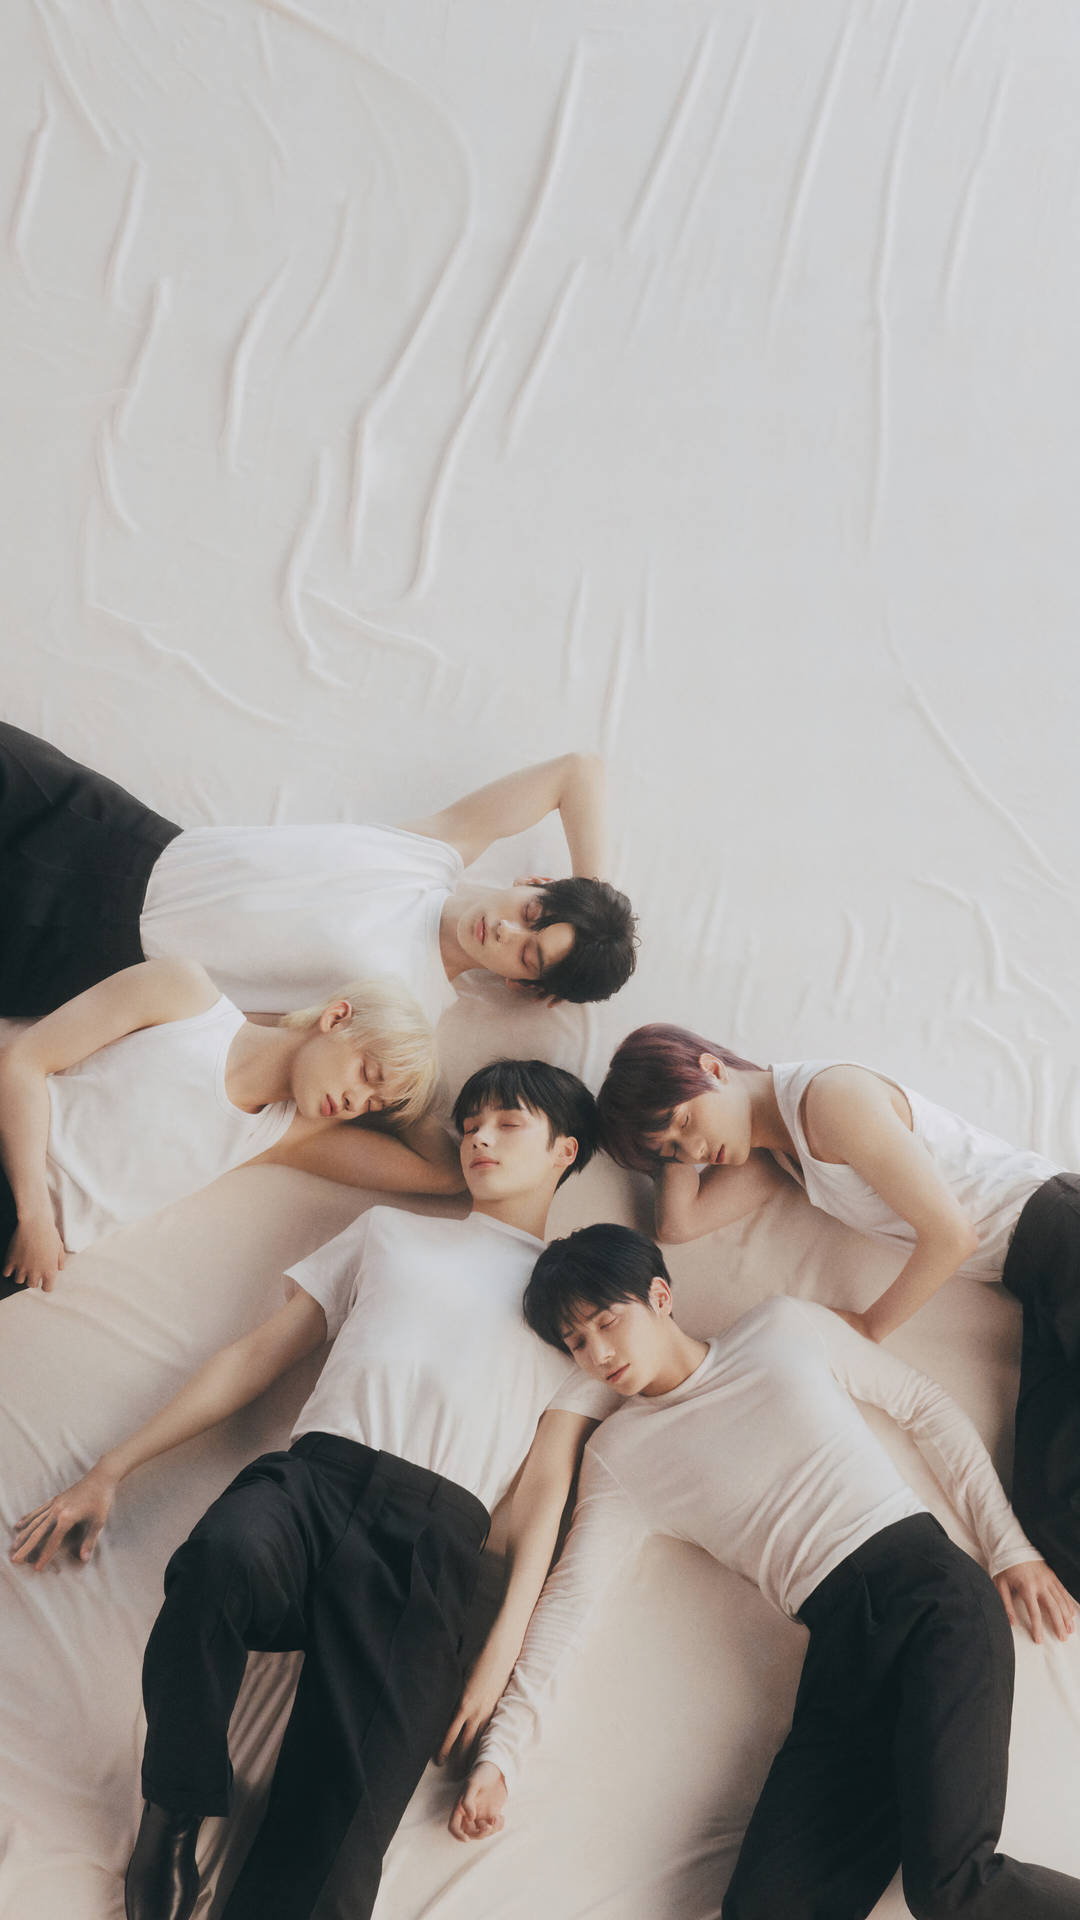 Txt Sleeping On A Bed Background